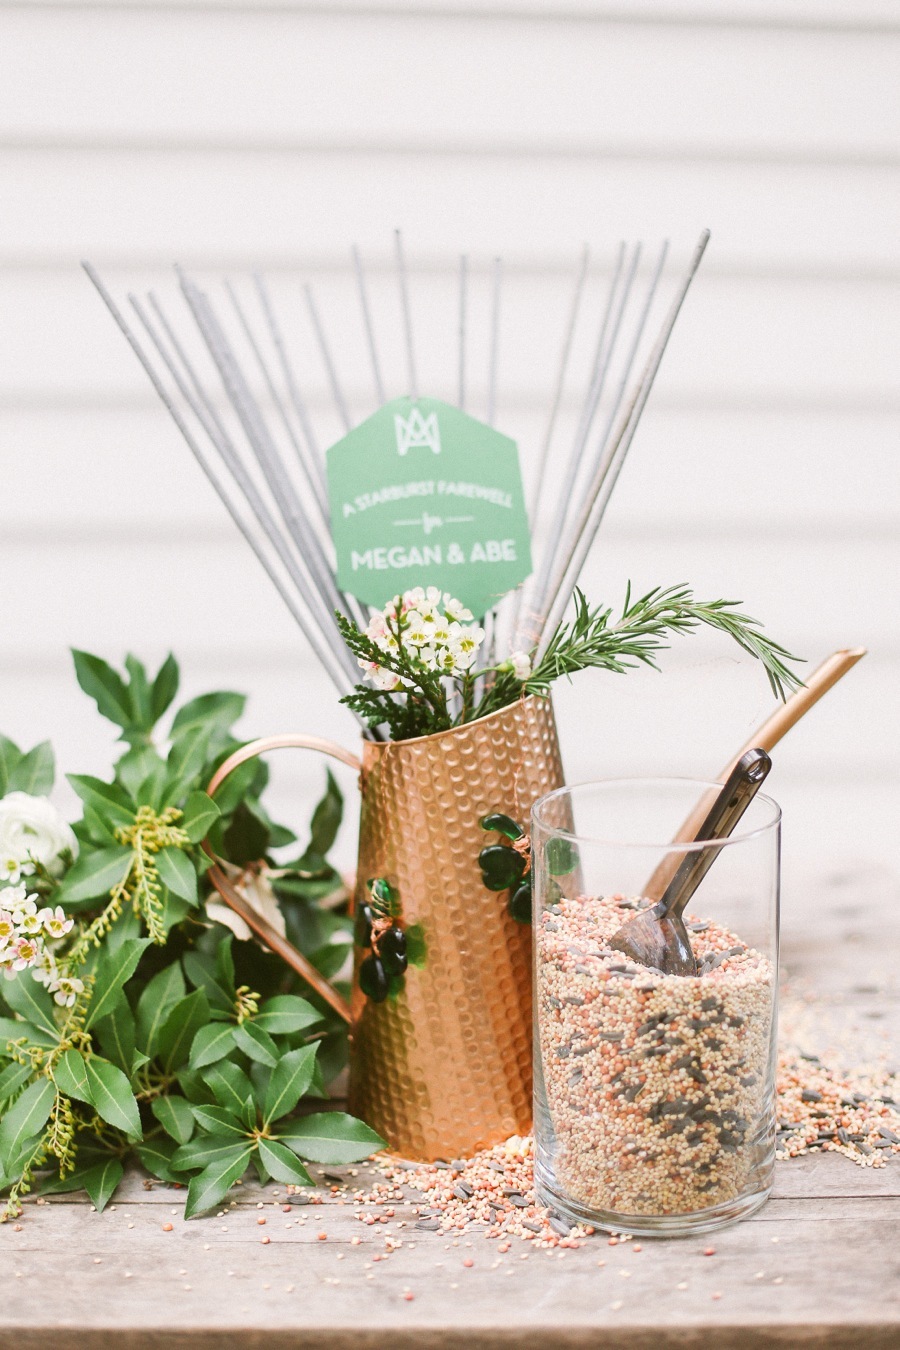 A copper pitcher with greenery and emerald gem decor for a centerpiece